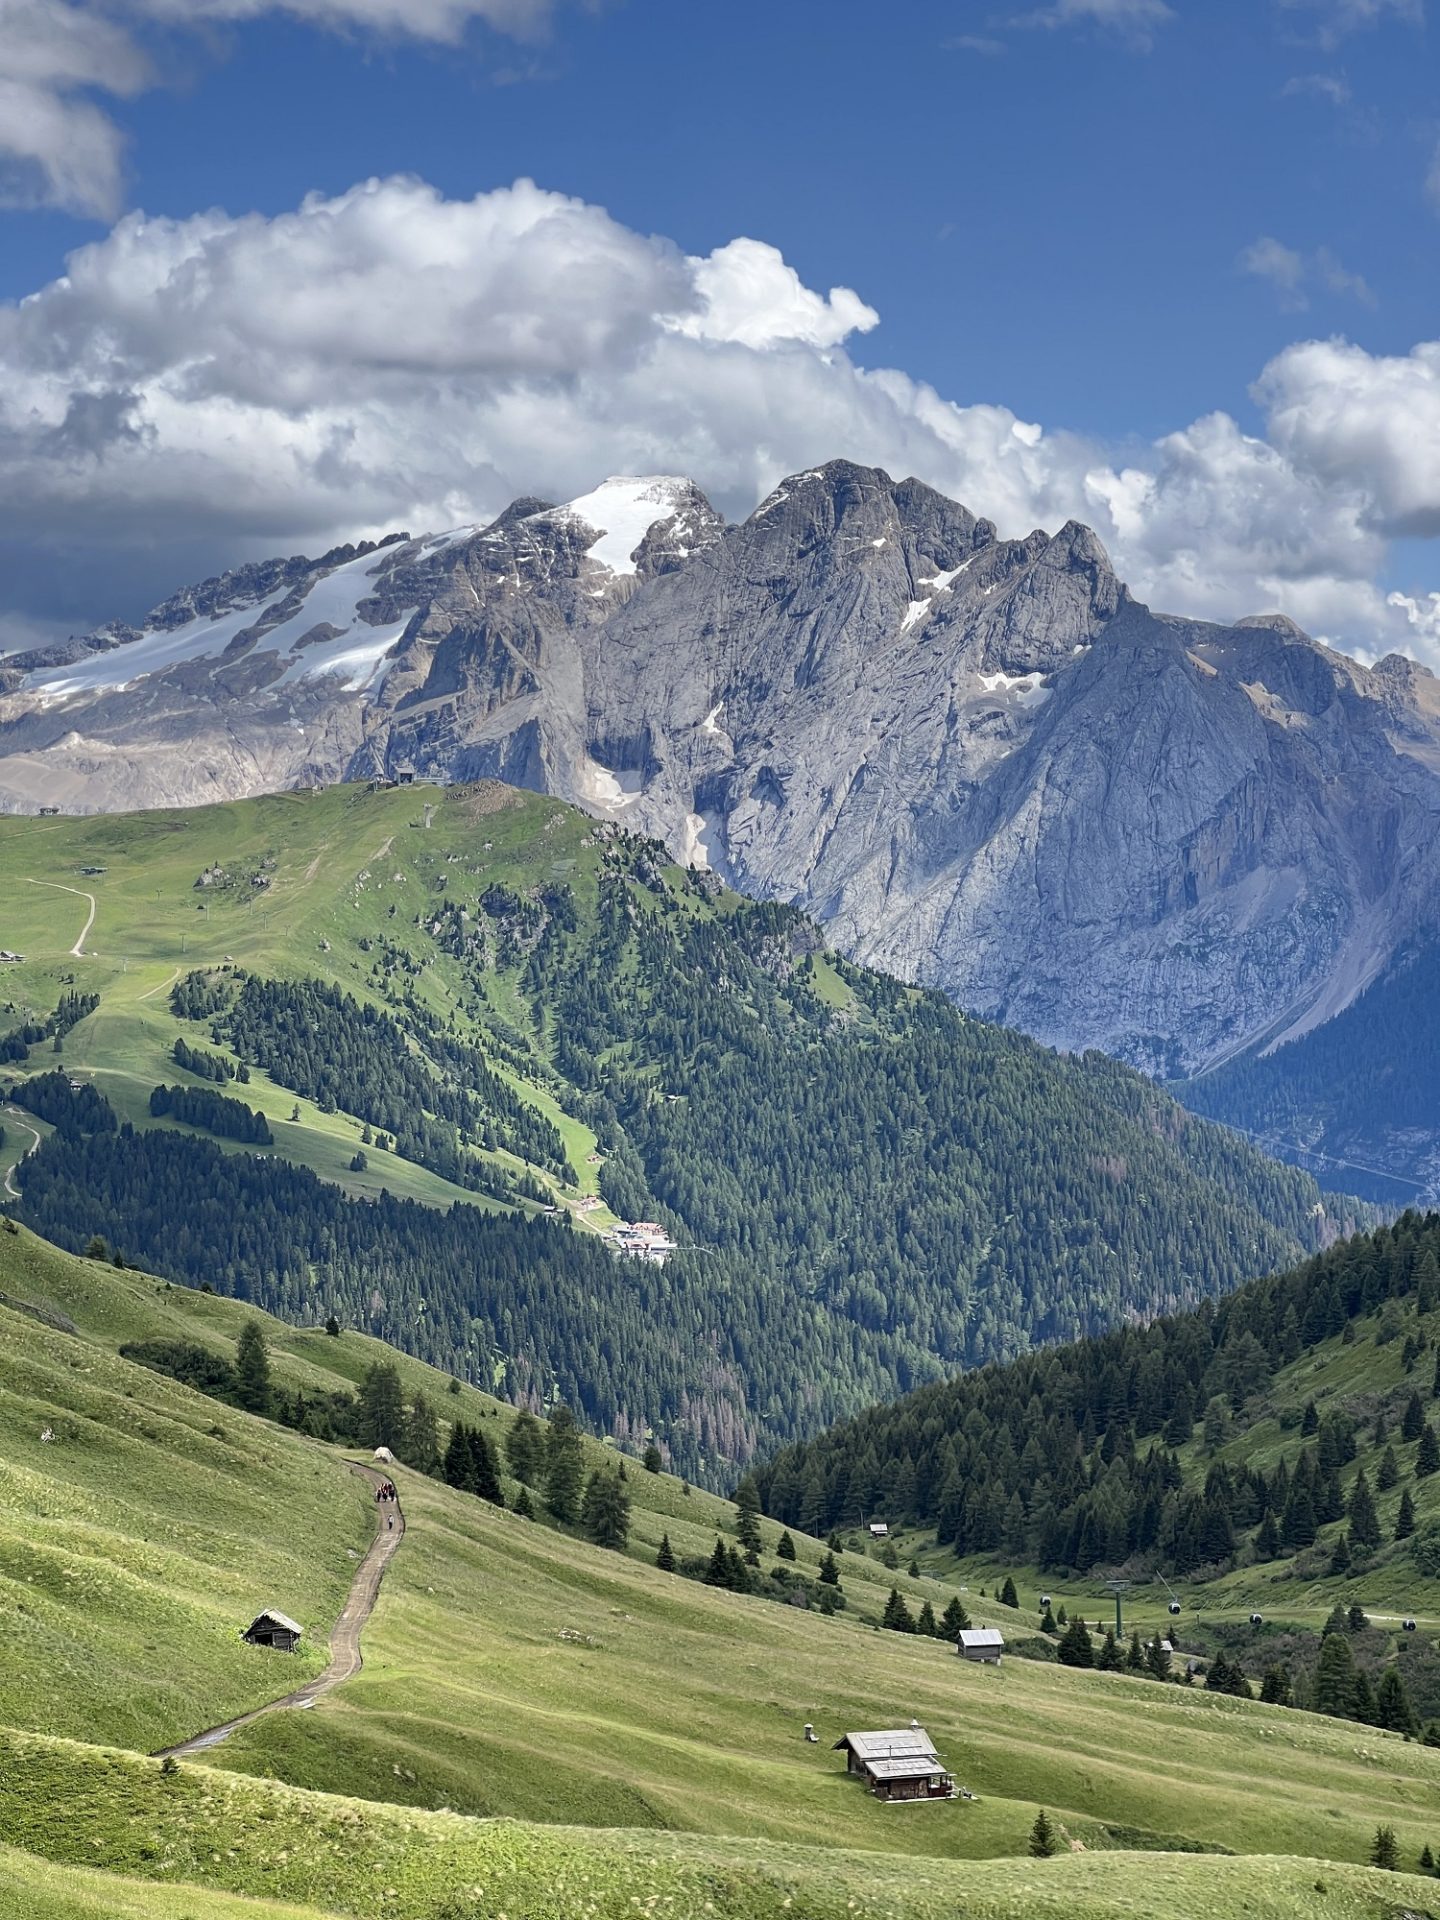 The Brenta Dolomites - Best hikes with links to trails